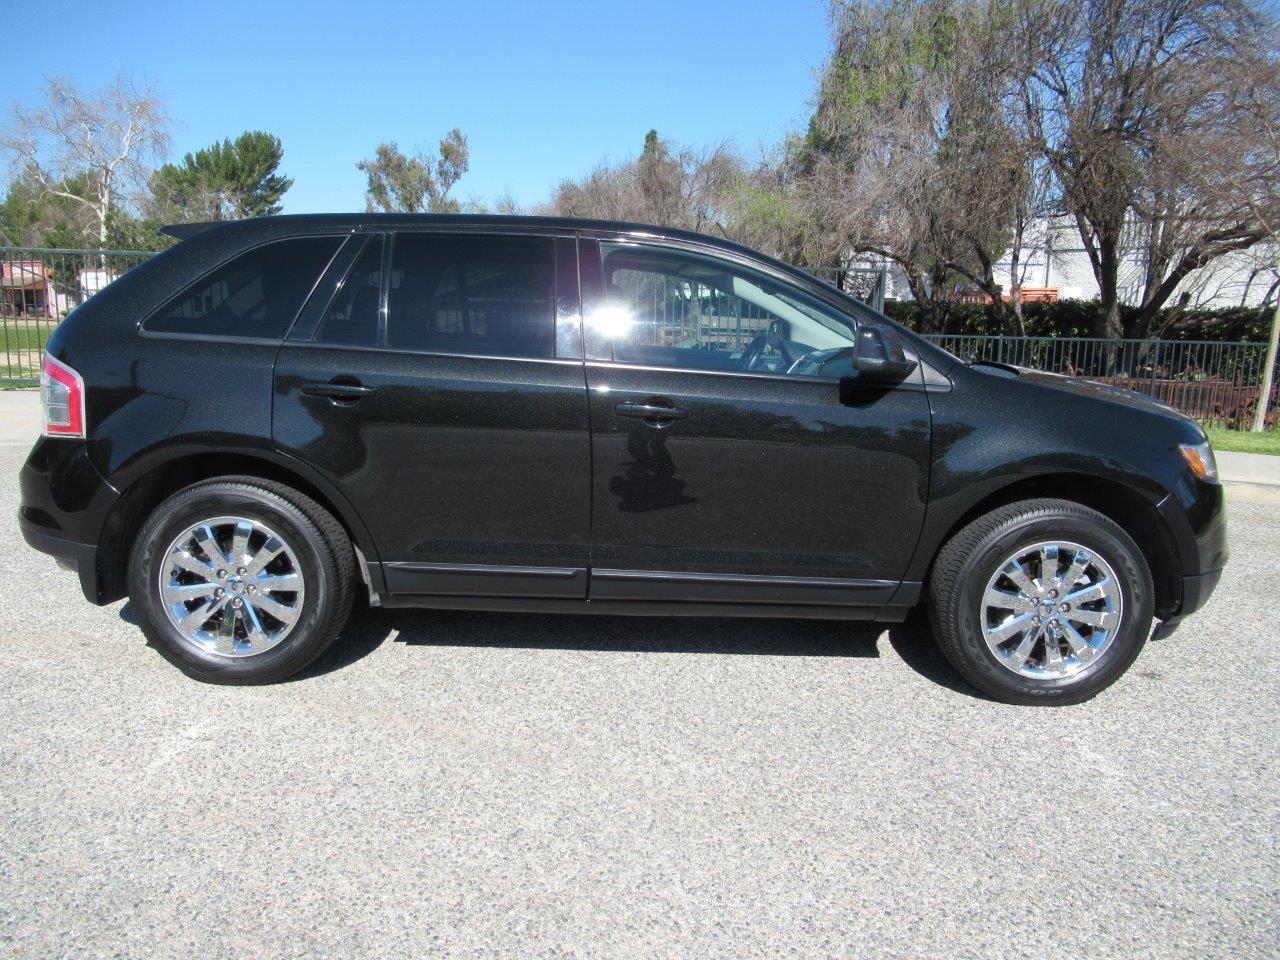 2010 ford edge colors